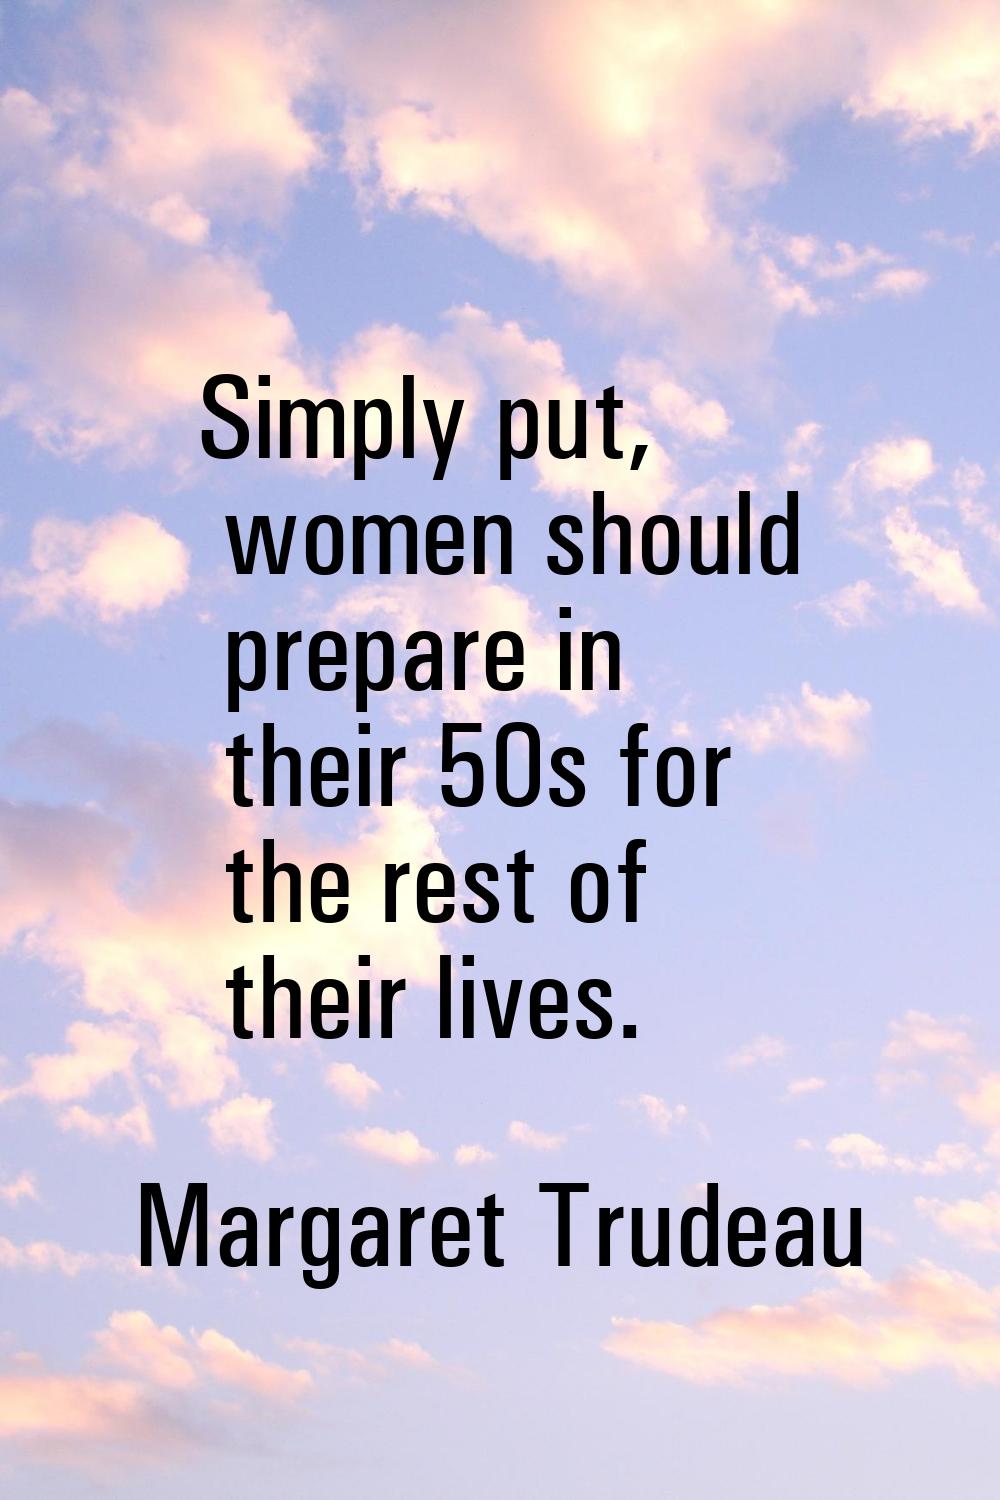 Simply put, women should prepare in their 50s for the rest of their lives.